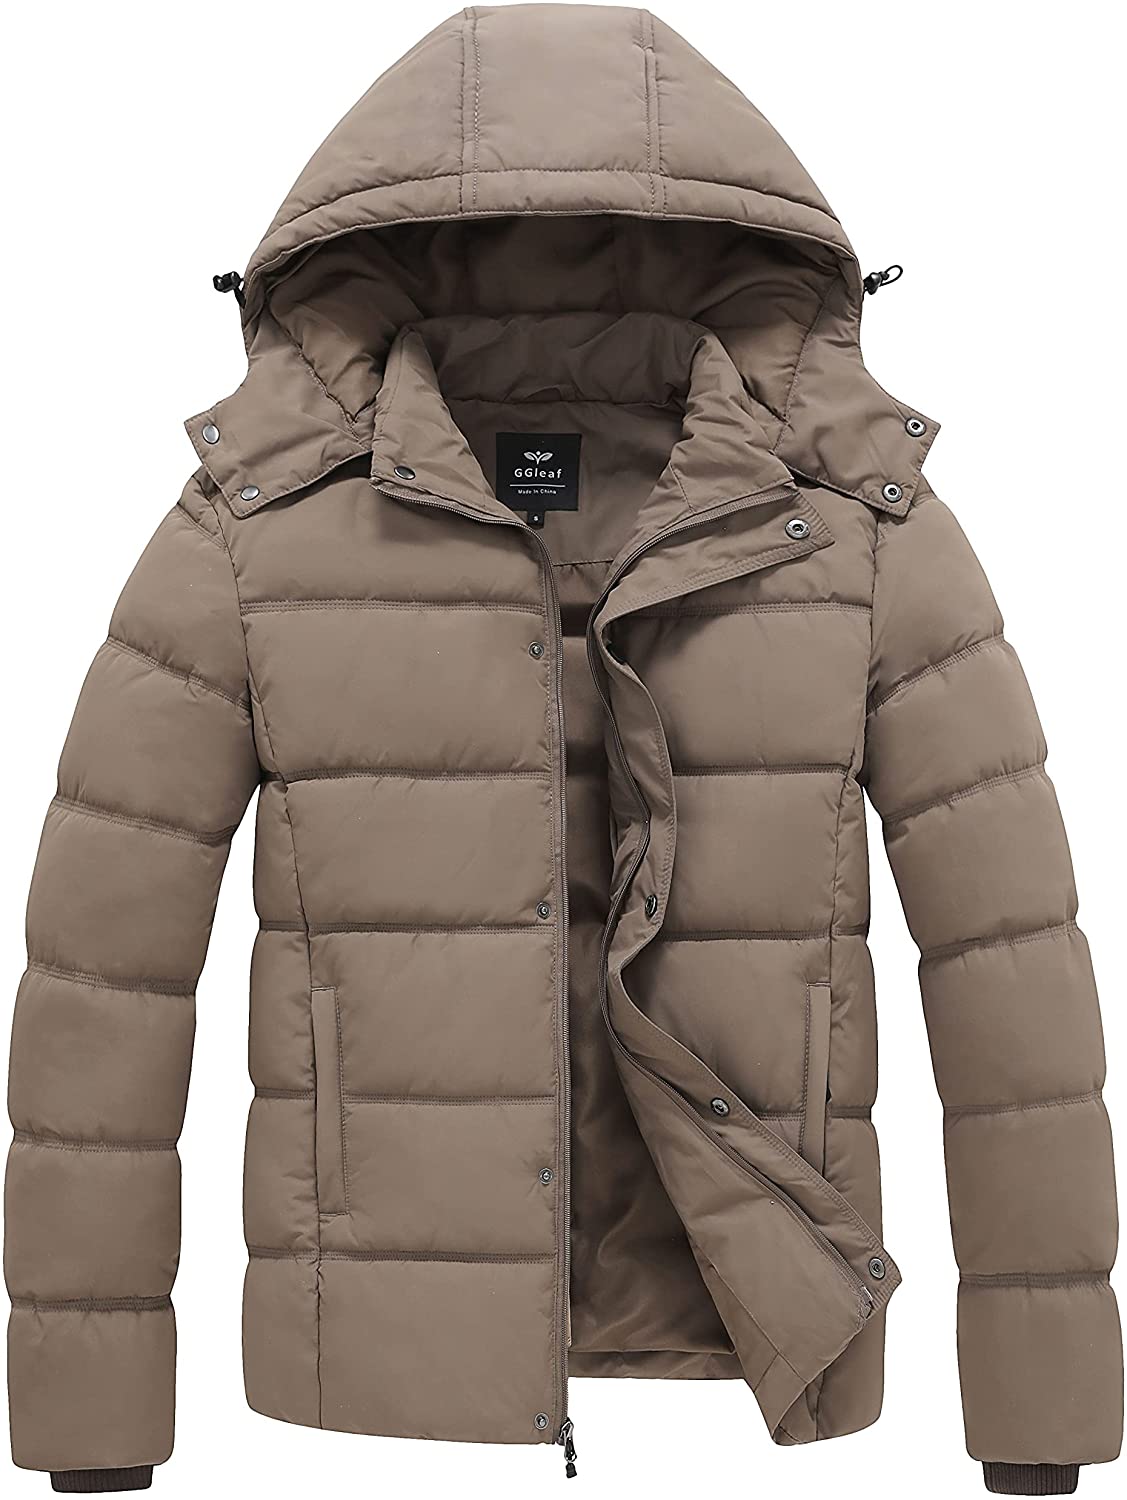 GGleaf Men's Hooded Winter Coat Warm Puffer Jacket Thicken Quilted Coat with Removable Hood